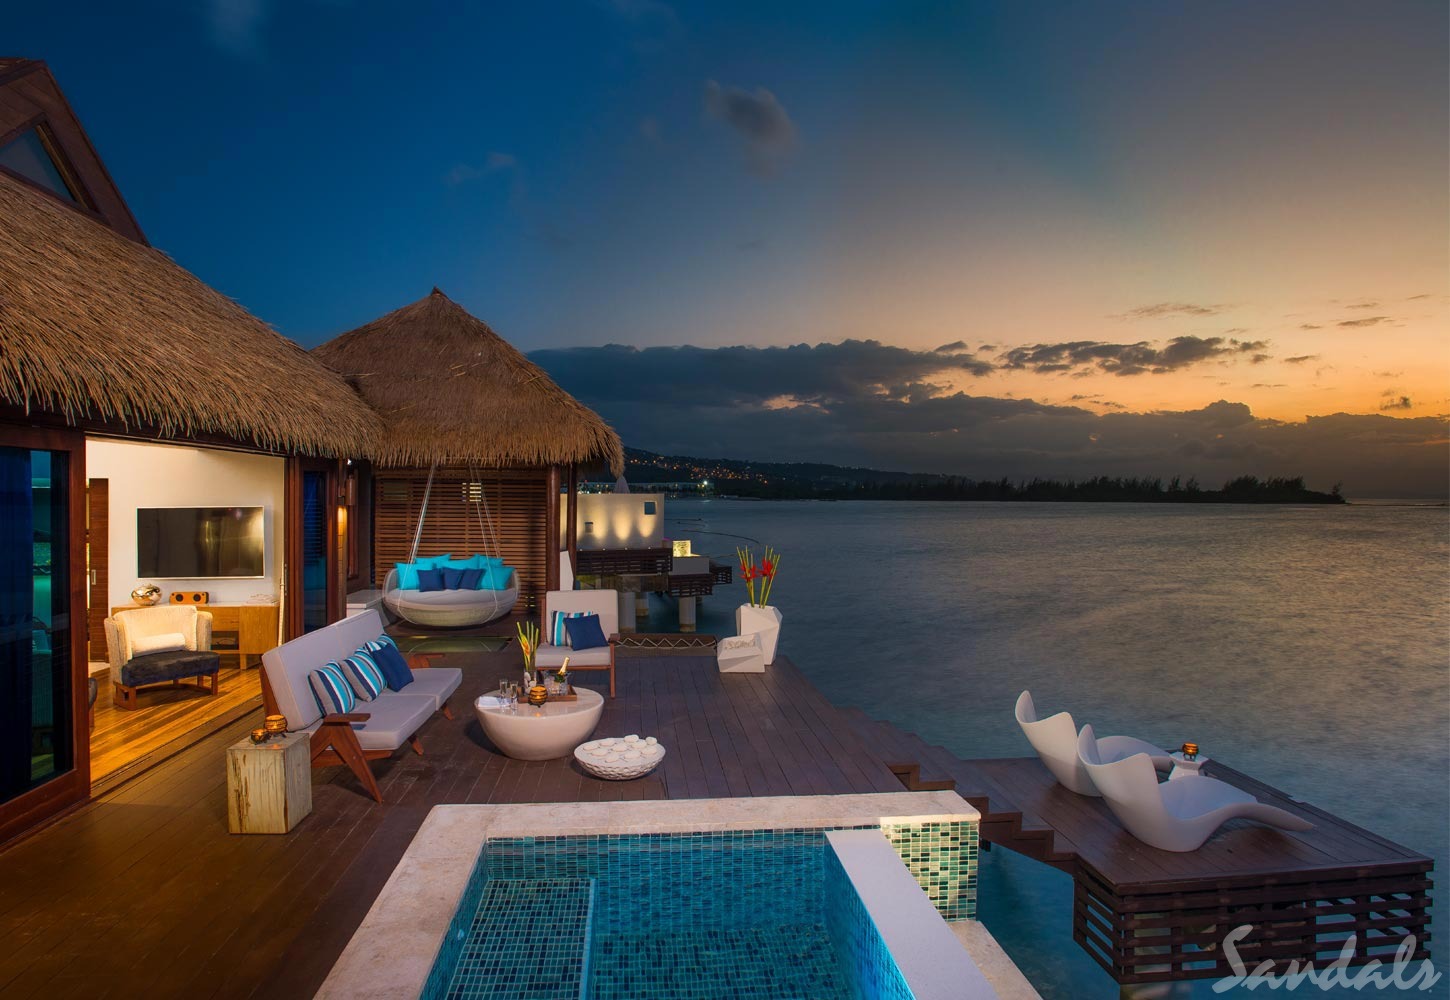 Sandals Resorts Bets on Luxury With Its Caribbean Overwater Bungalows